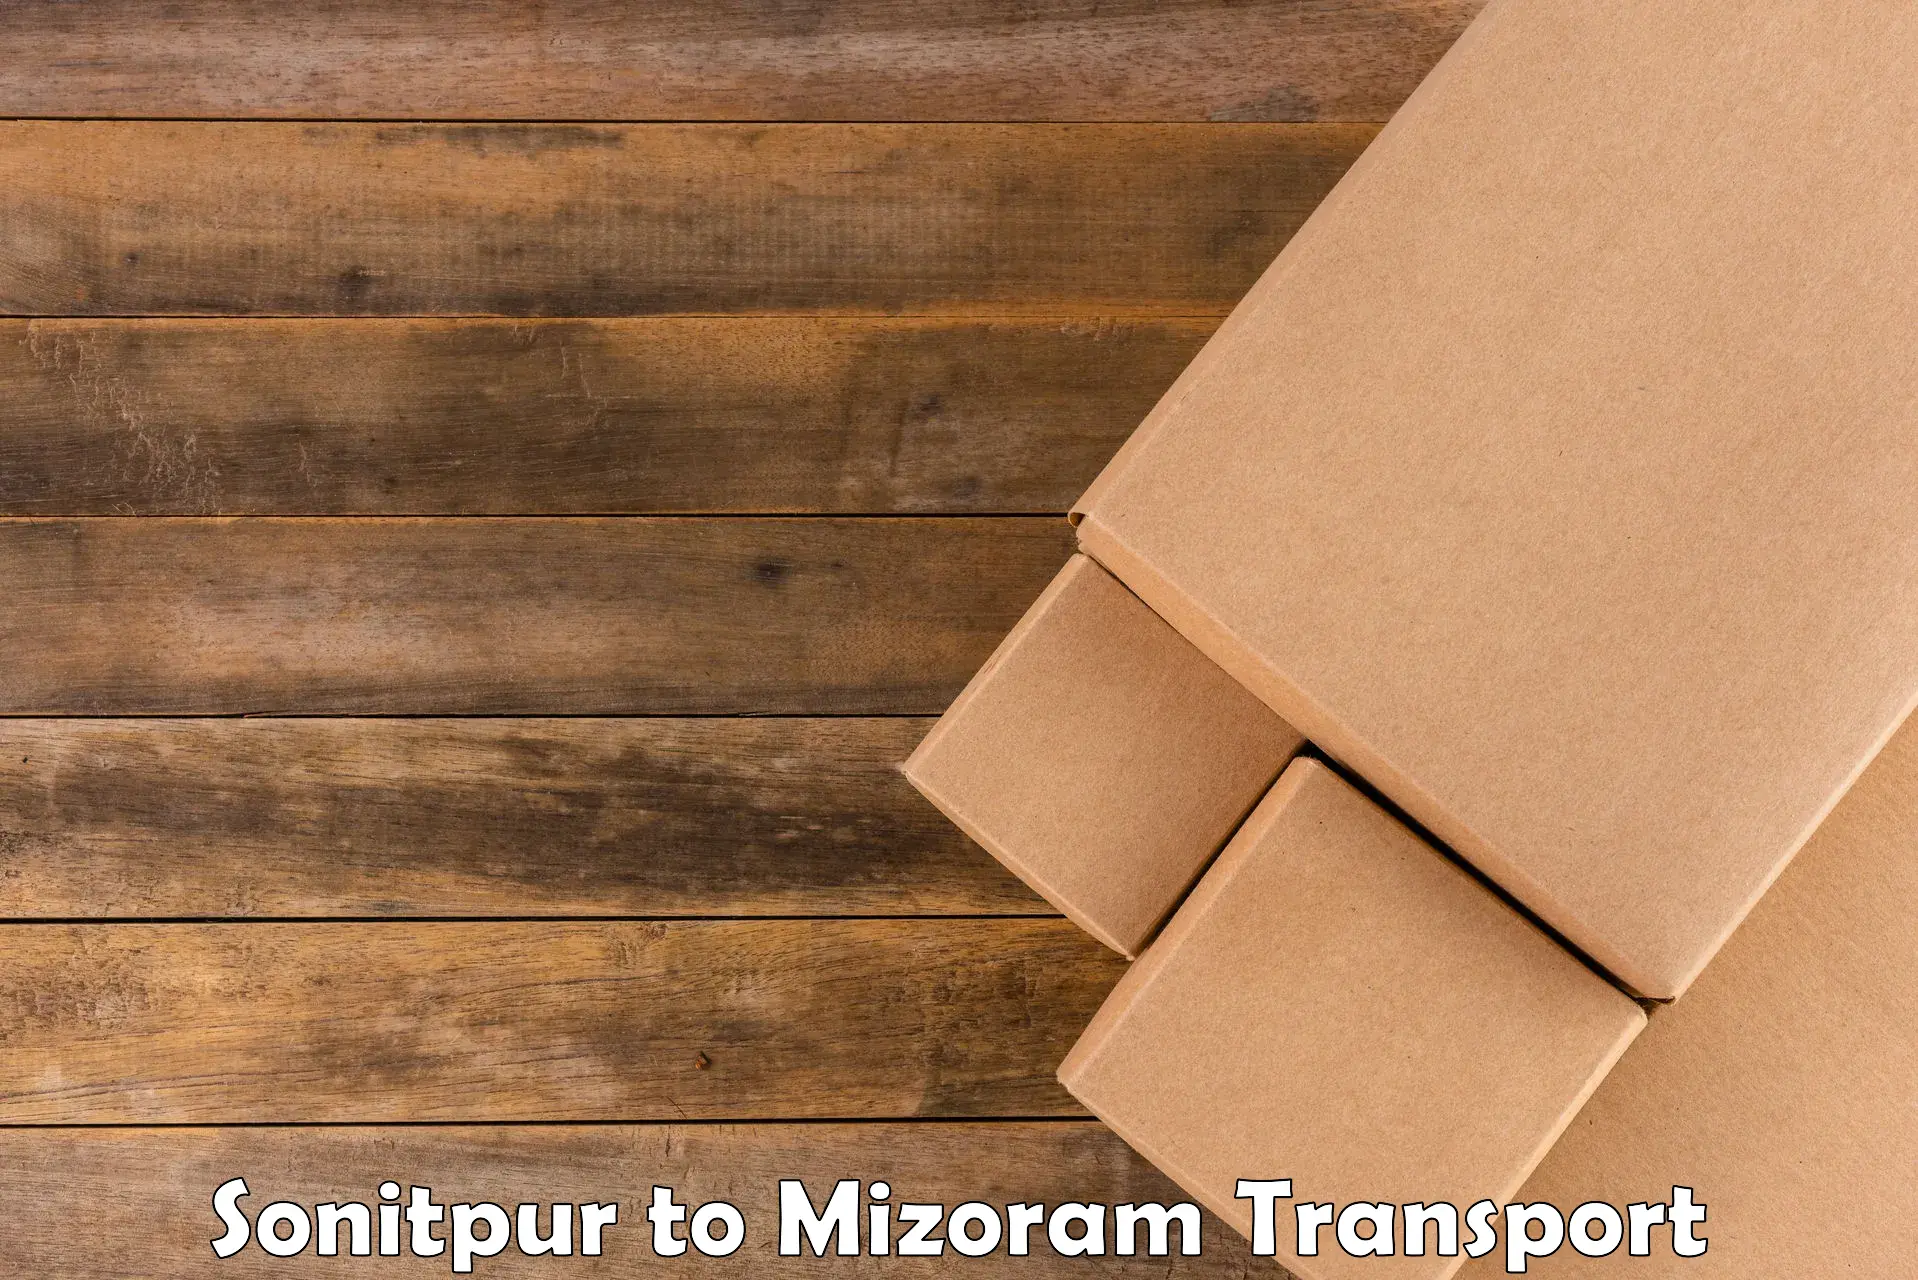 Daily parcel service transport Sonitpur to Saitual